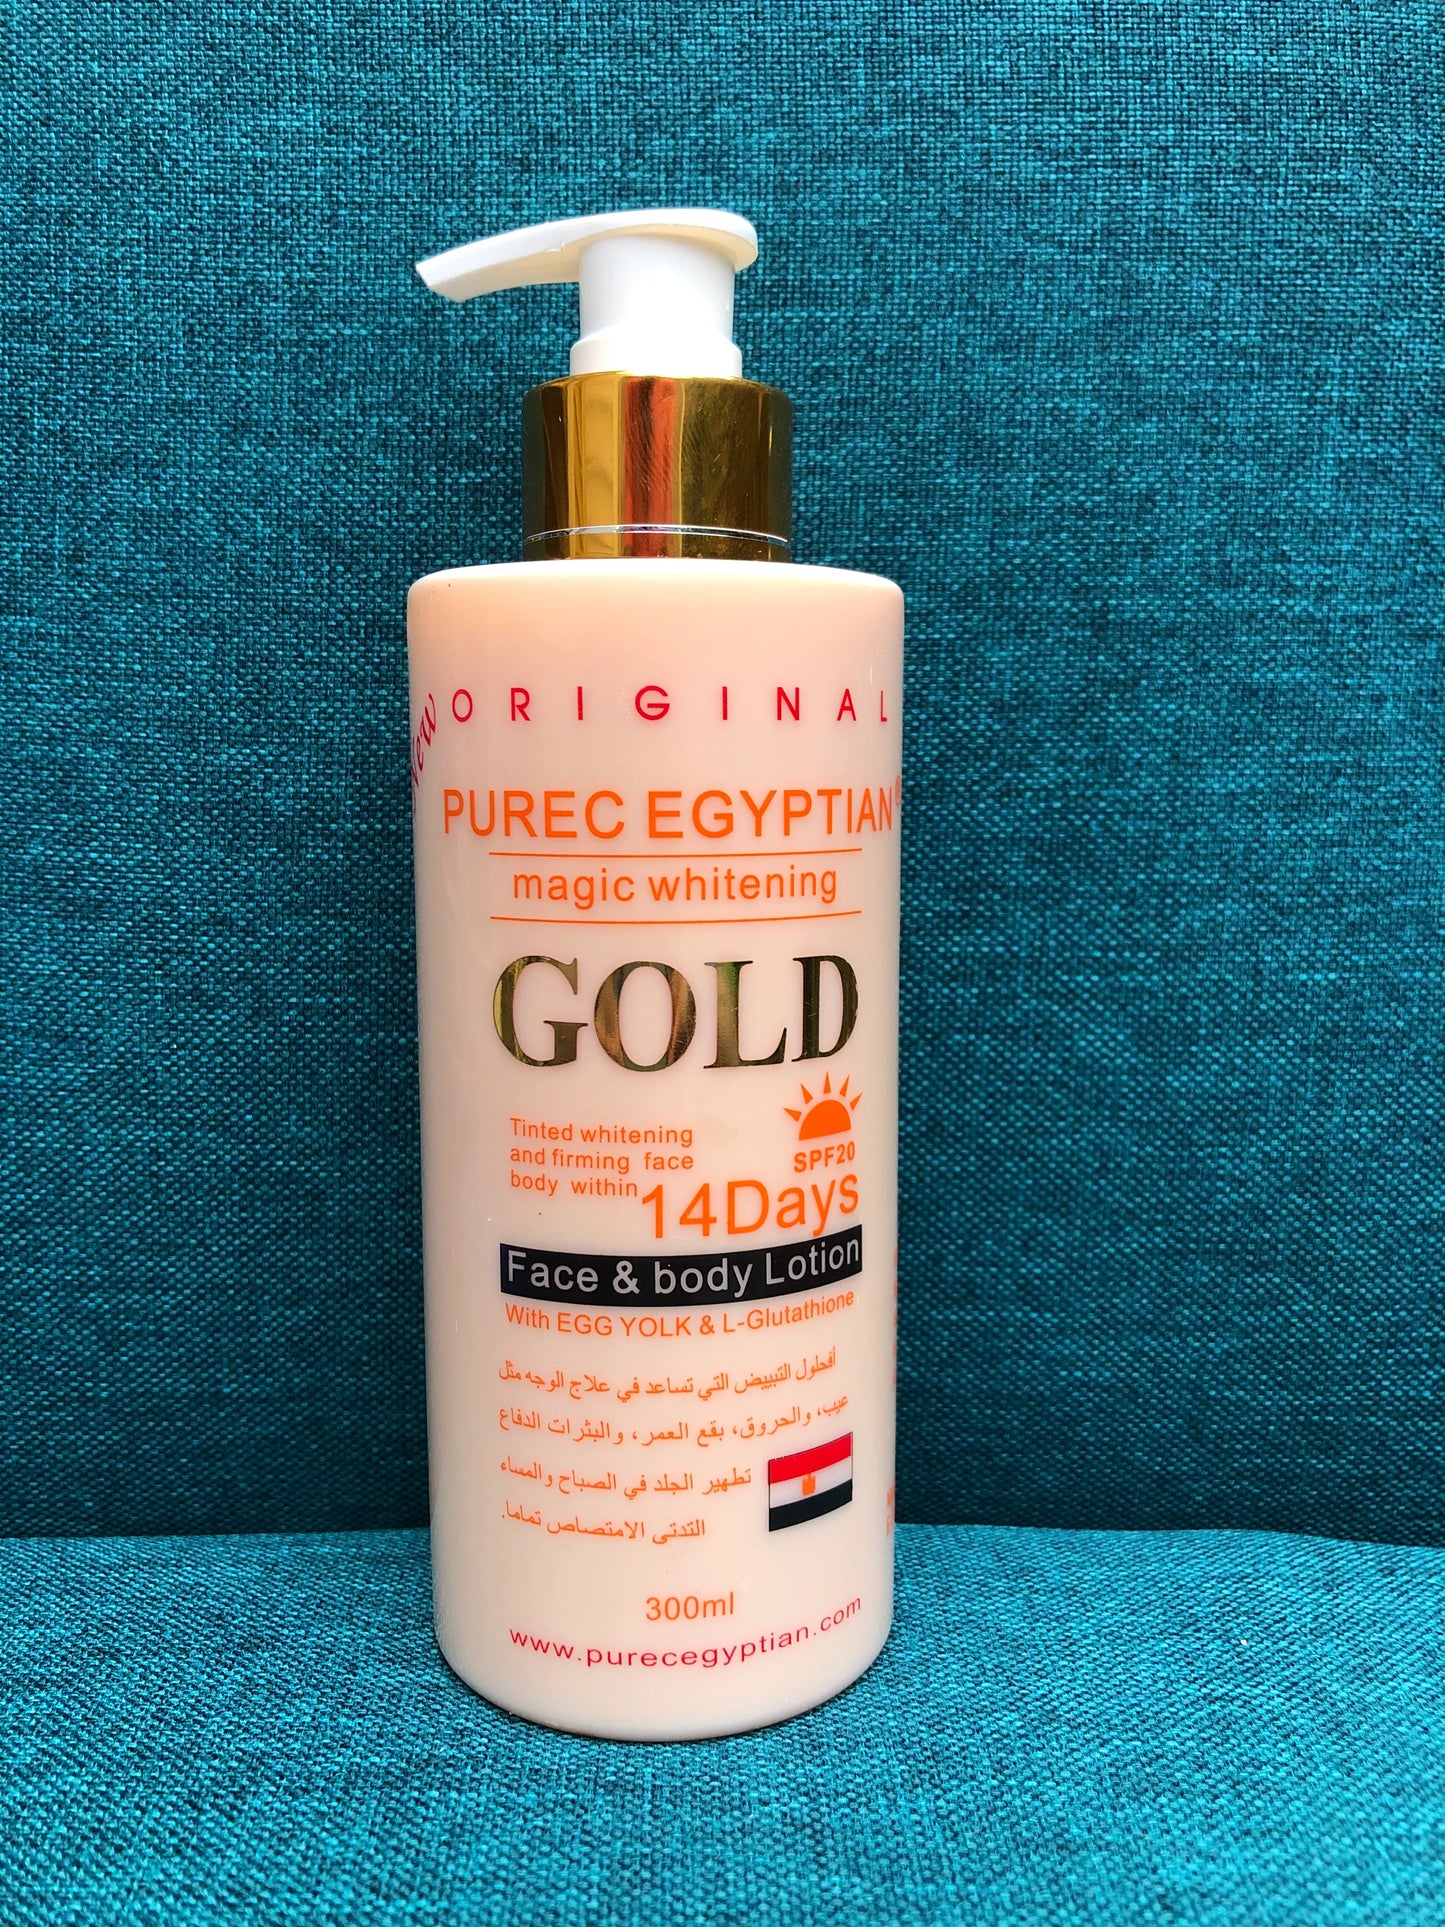 Purec Egyptian Gold Face & Body Lotion 300ml